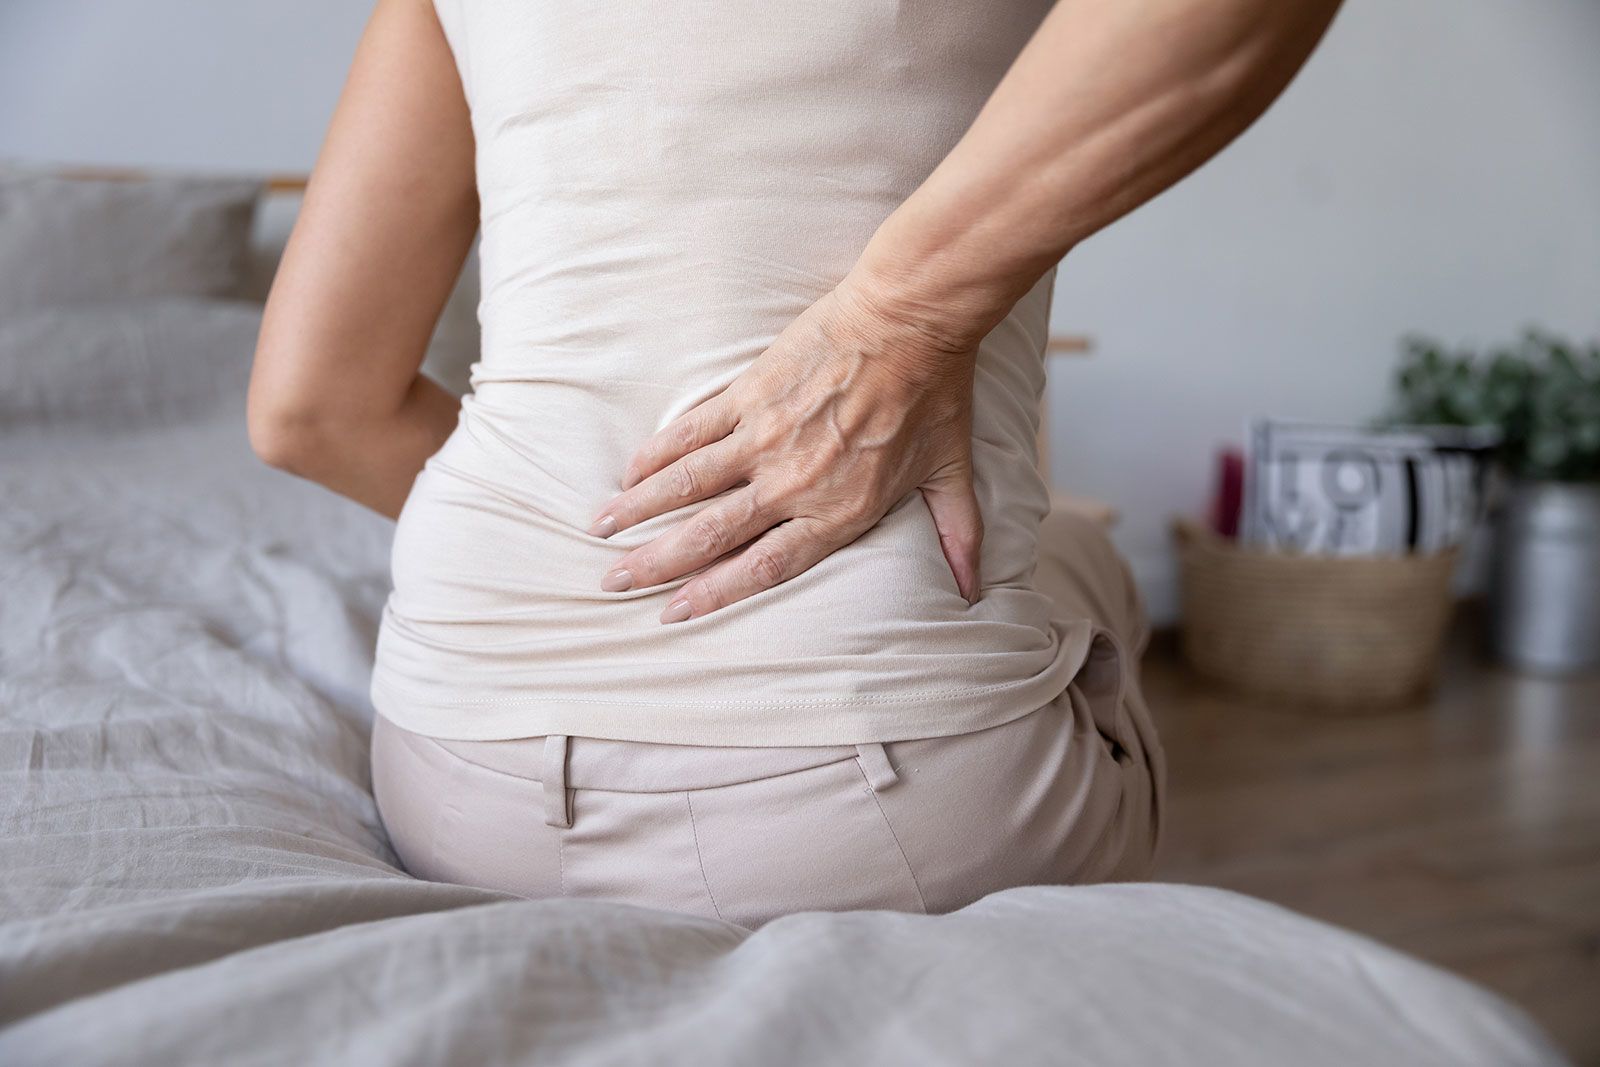 How to ease the symptoms of sciatica